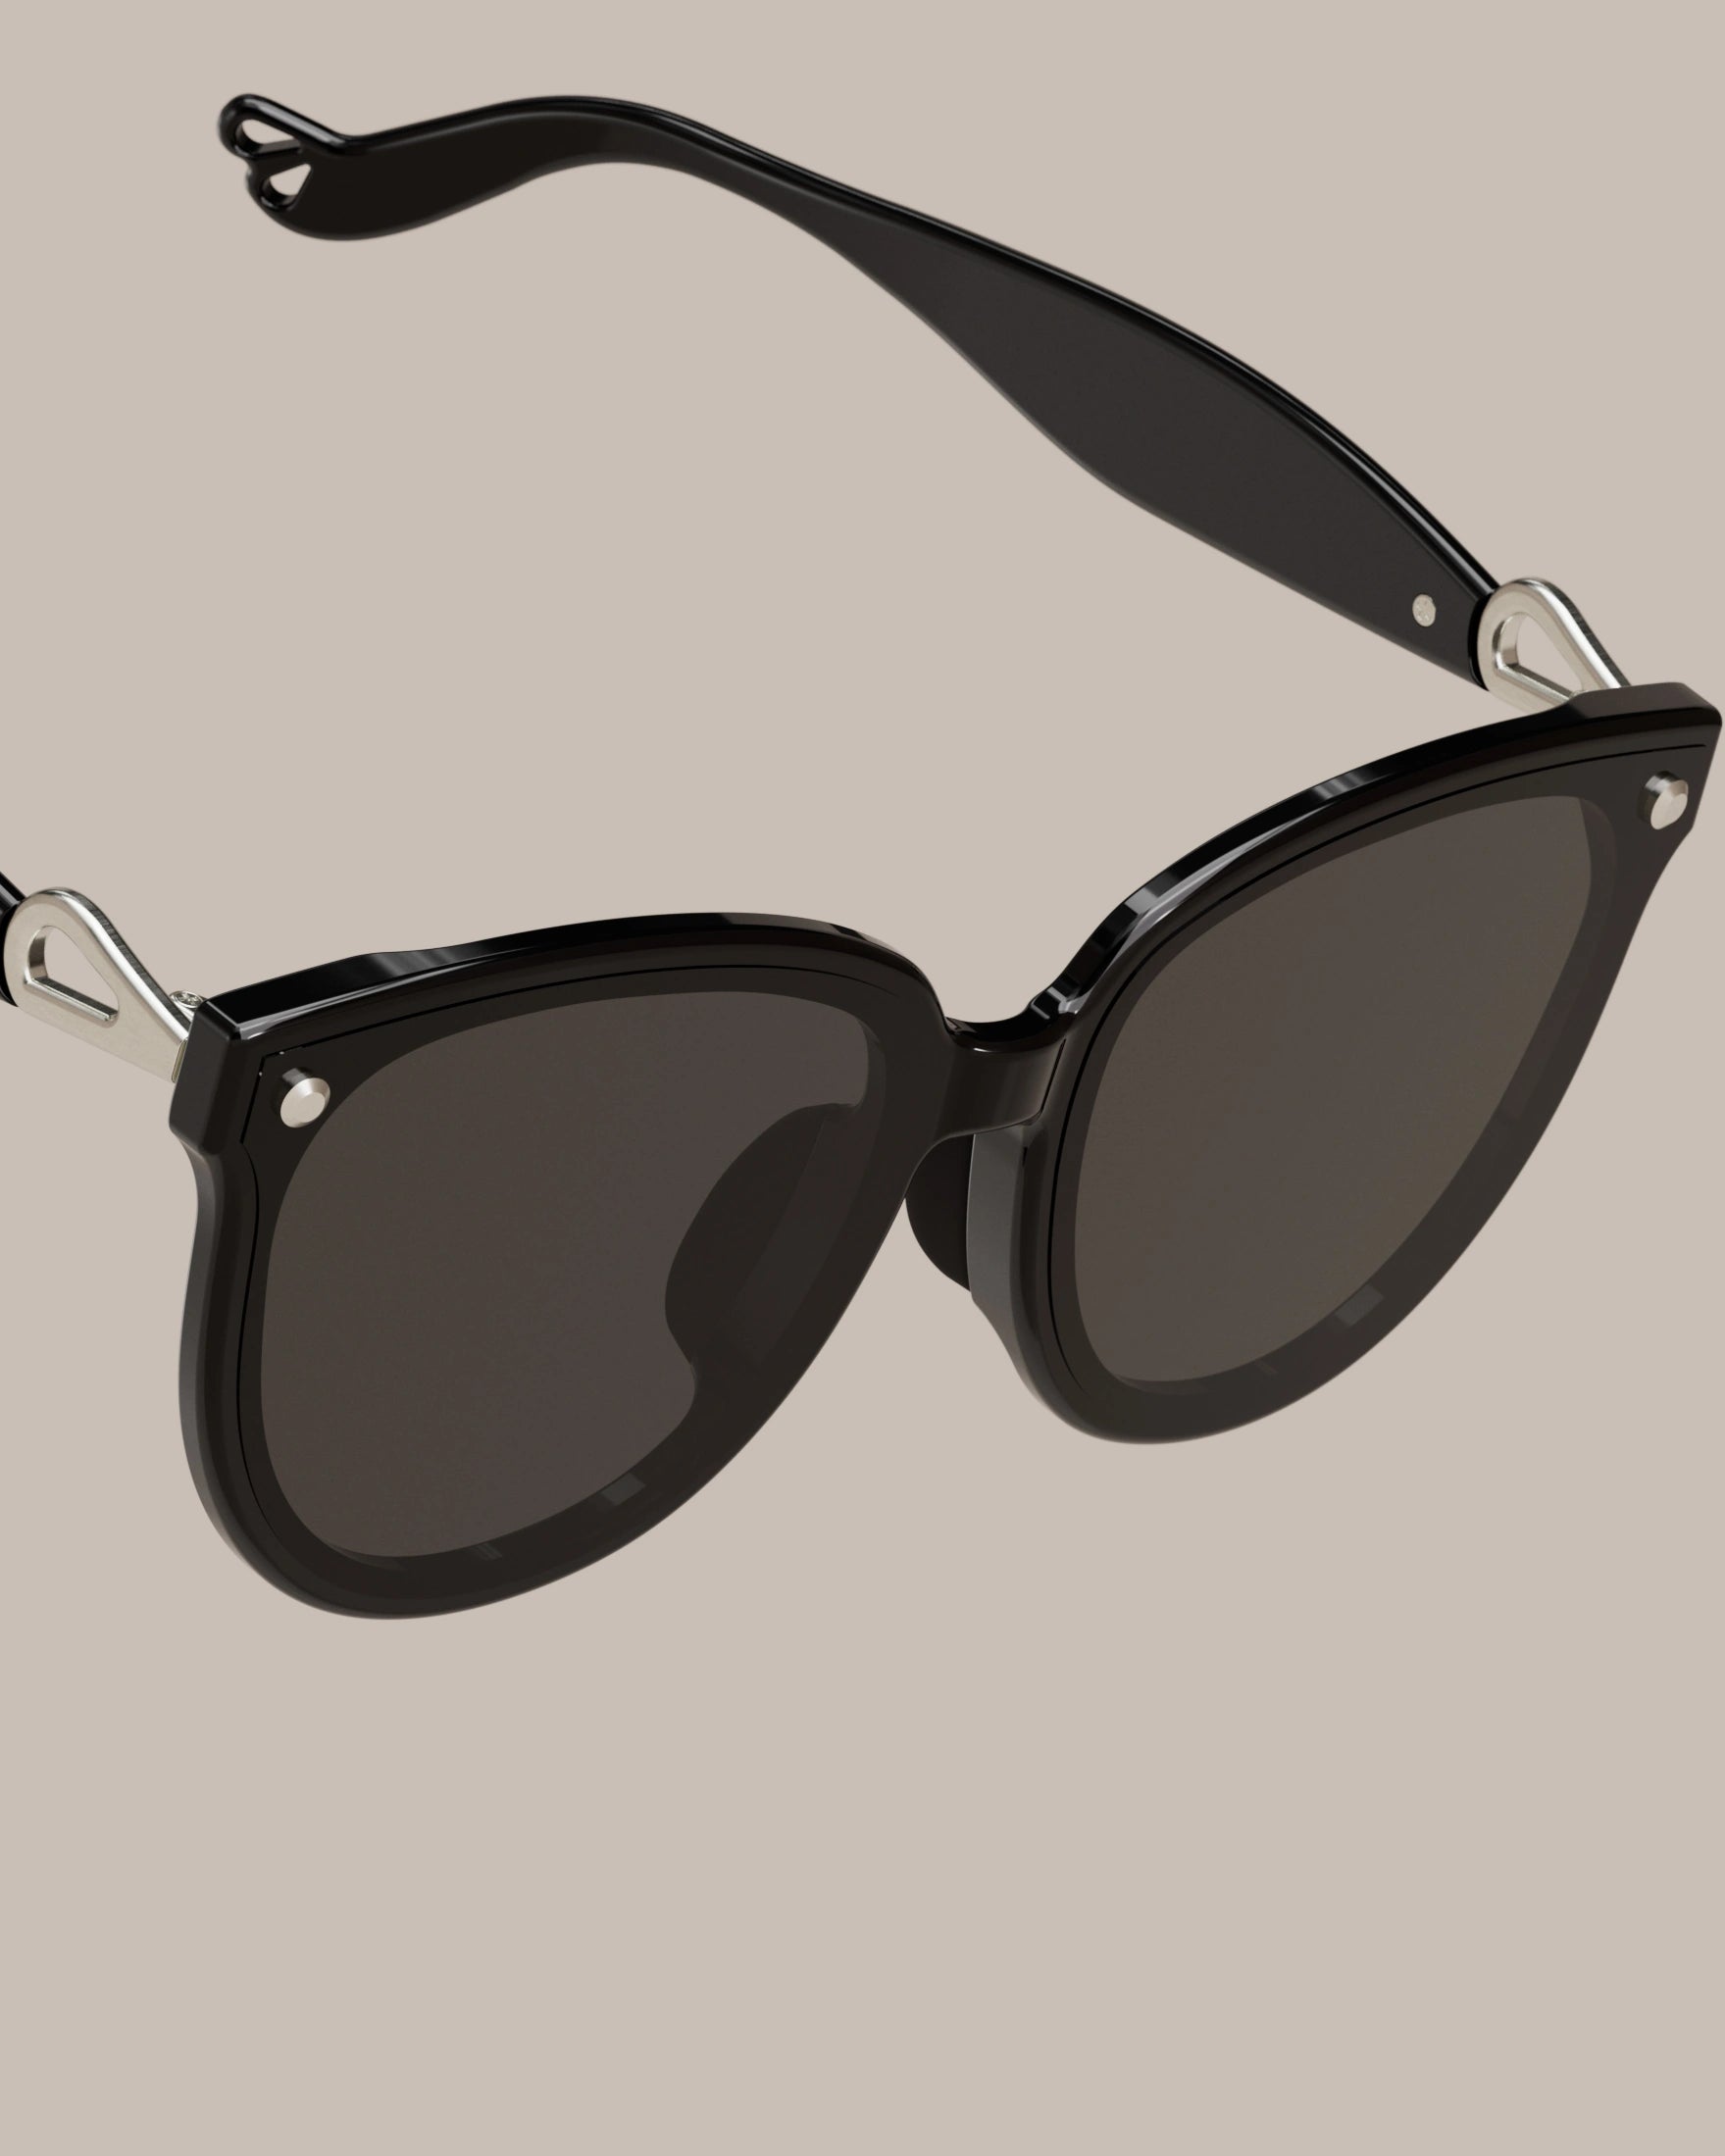 Rimless design – Nana: A Perfect Blend of Style and Comfort